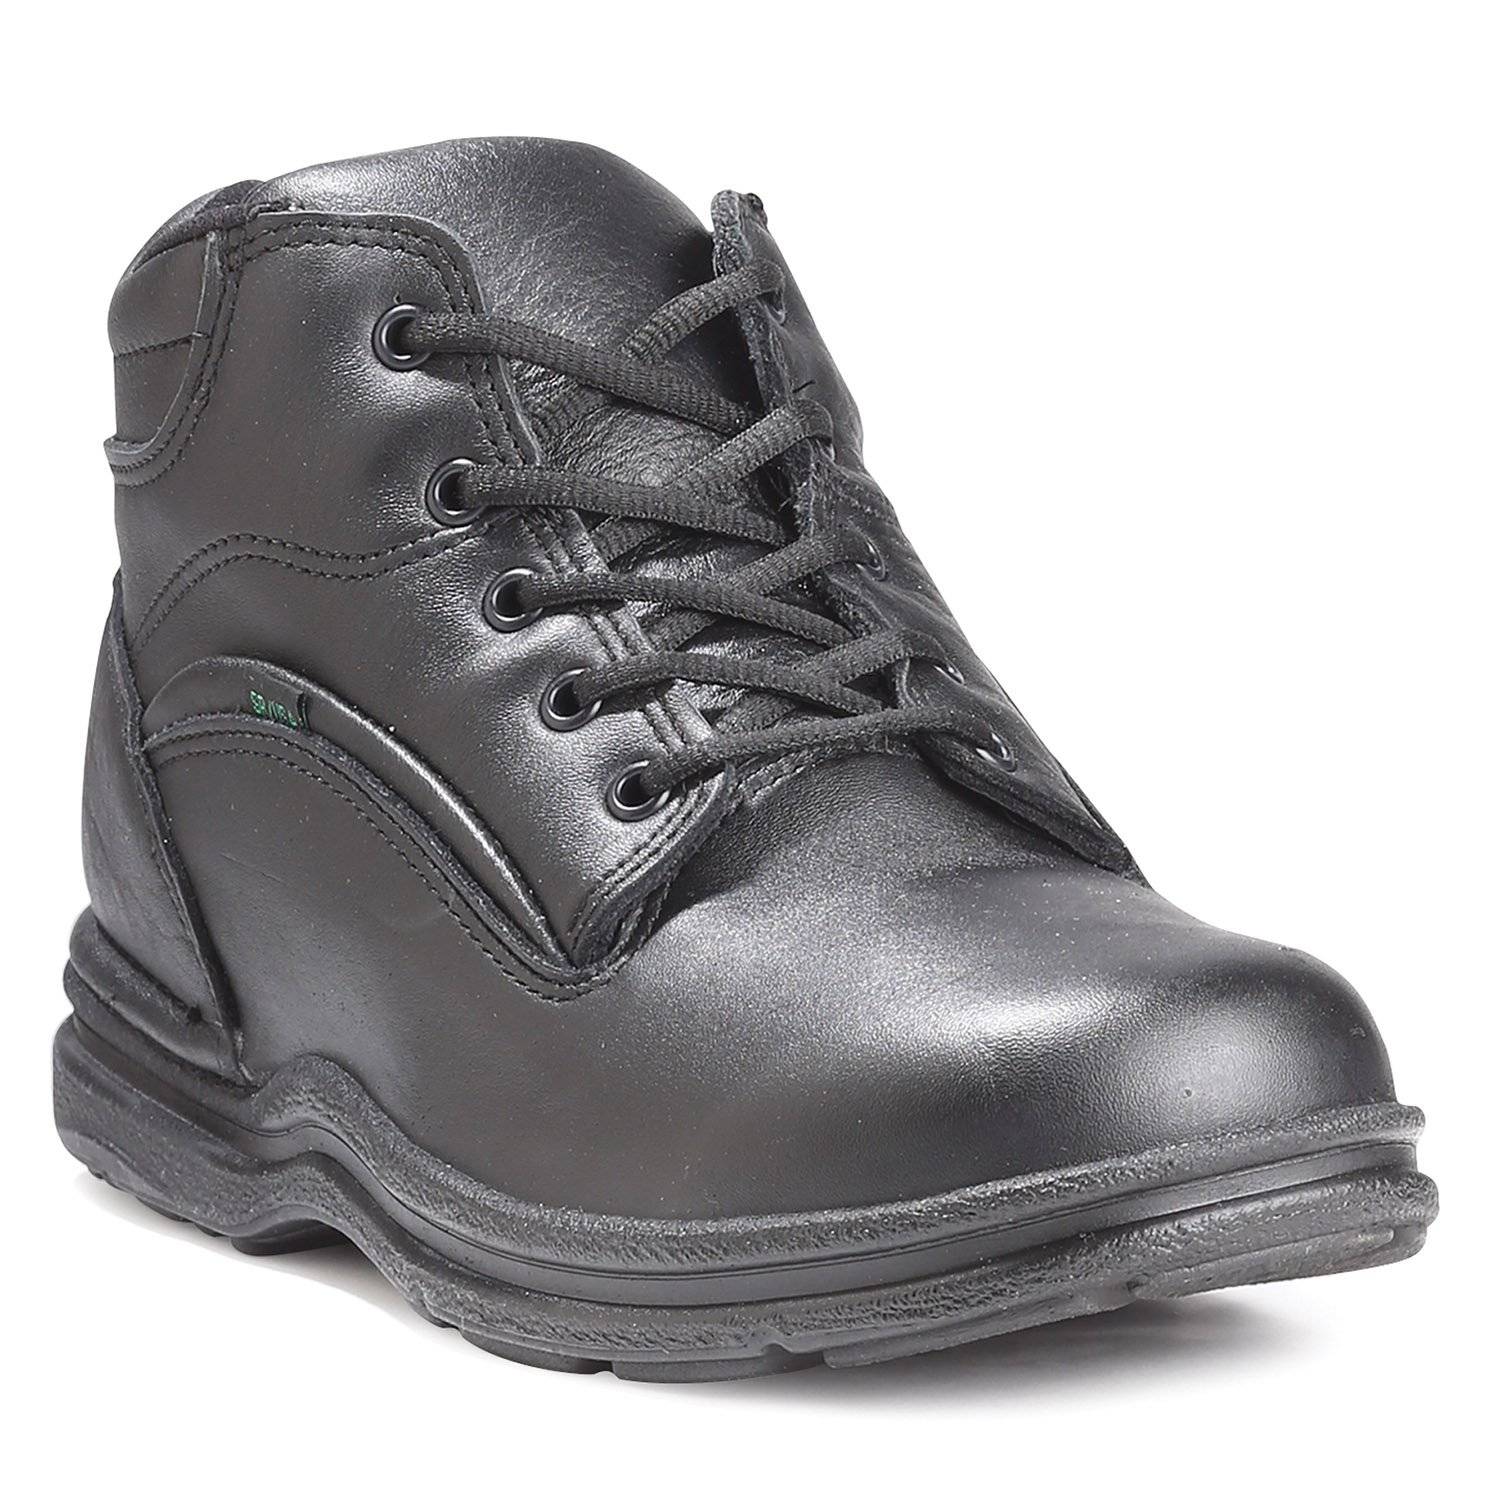 Buy > rockport boot > in stock